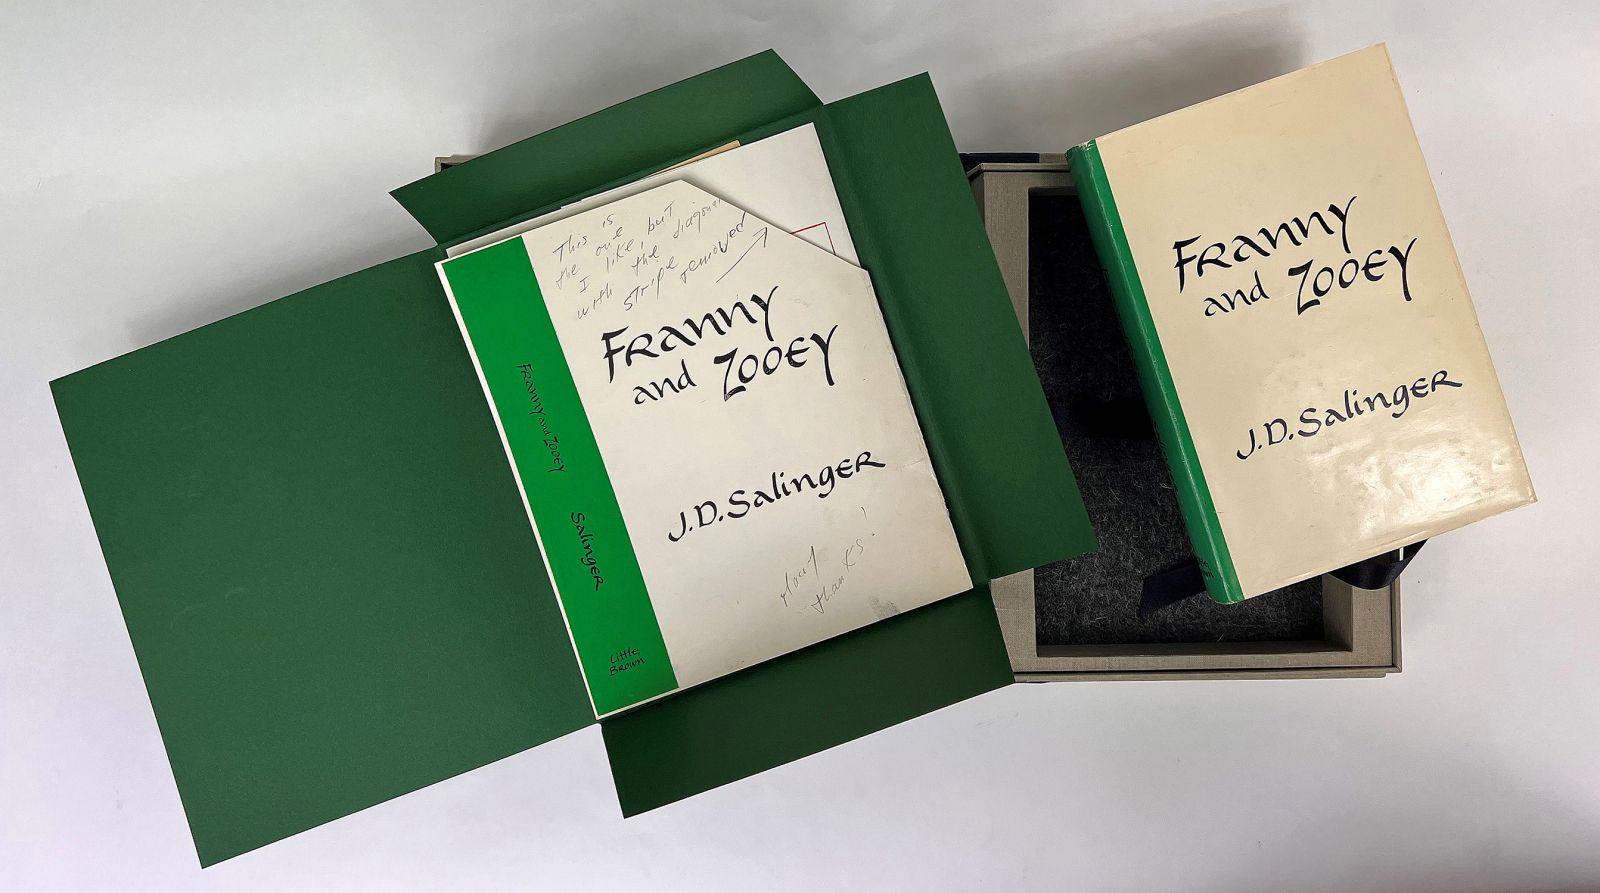 FRANNY AND ZOOEY - Original Dustwrapper Artwork - INSCRIBED BY THE AUTHOR. -  image 6